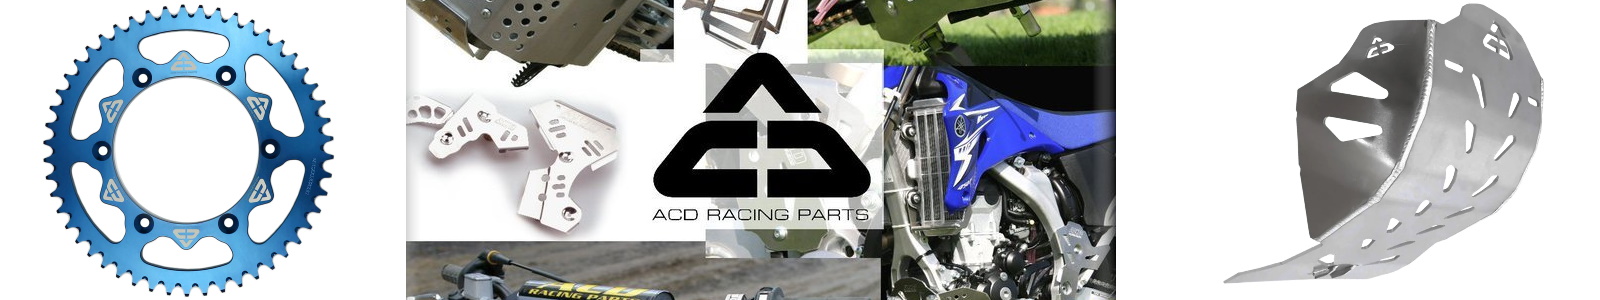 carenages moto ACD Racing Parts